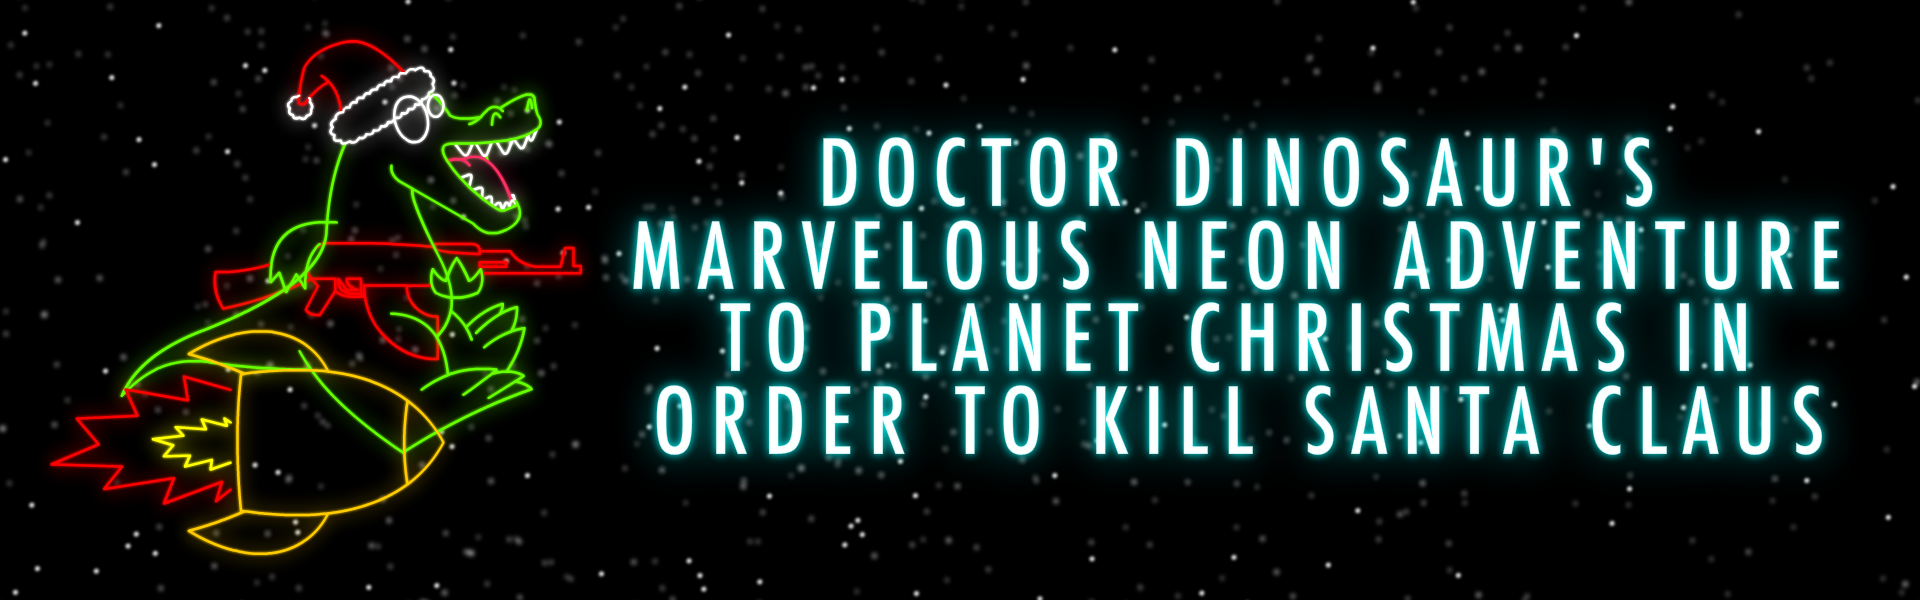 Doctor Dinoaur's Marvelous Neon Adventure To Planet Christmas In Order To Kill Santa Clause